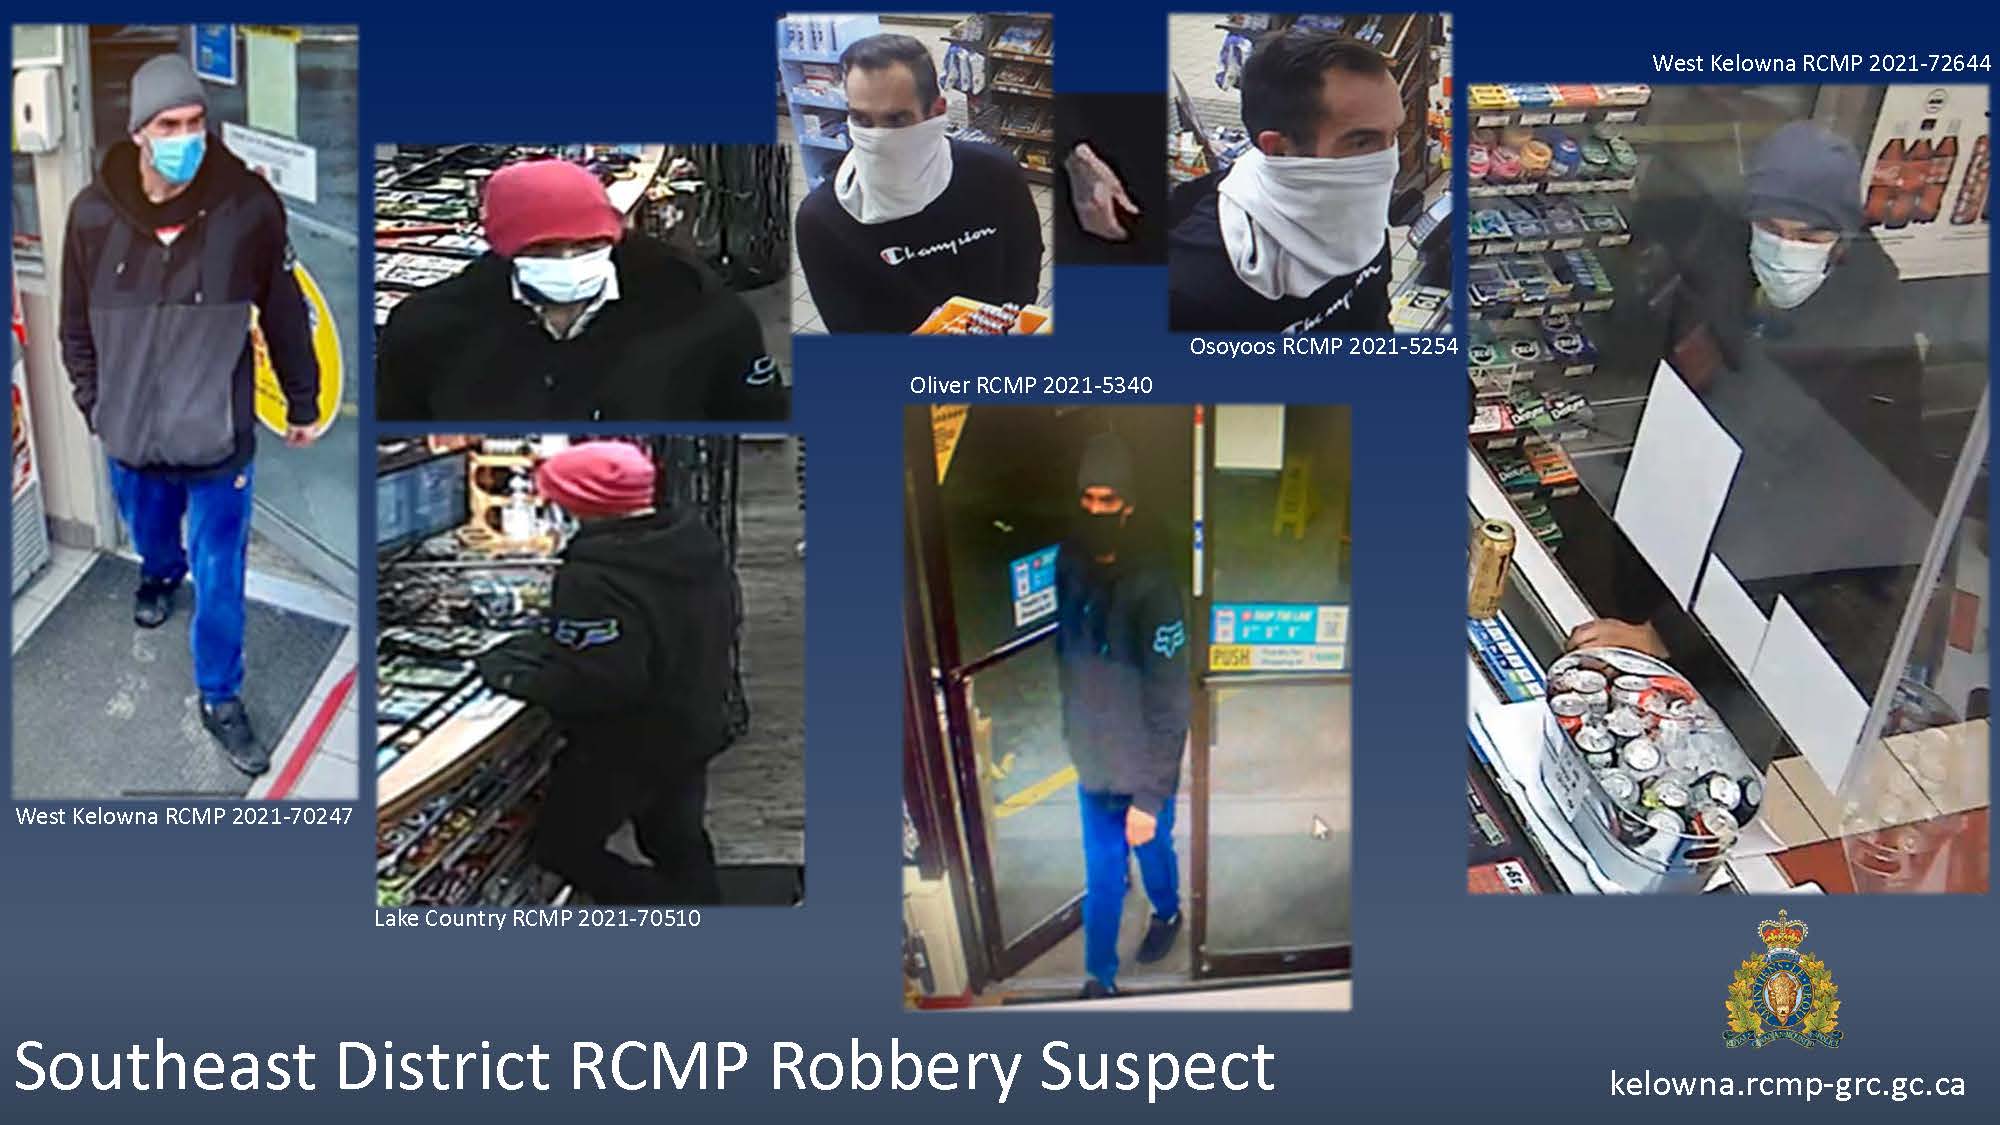 RCMP investigating string of armed robberies in the Southeast District